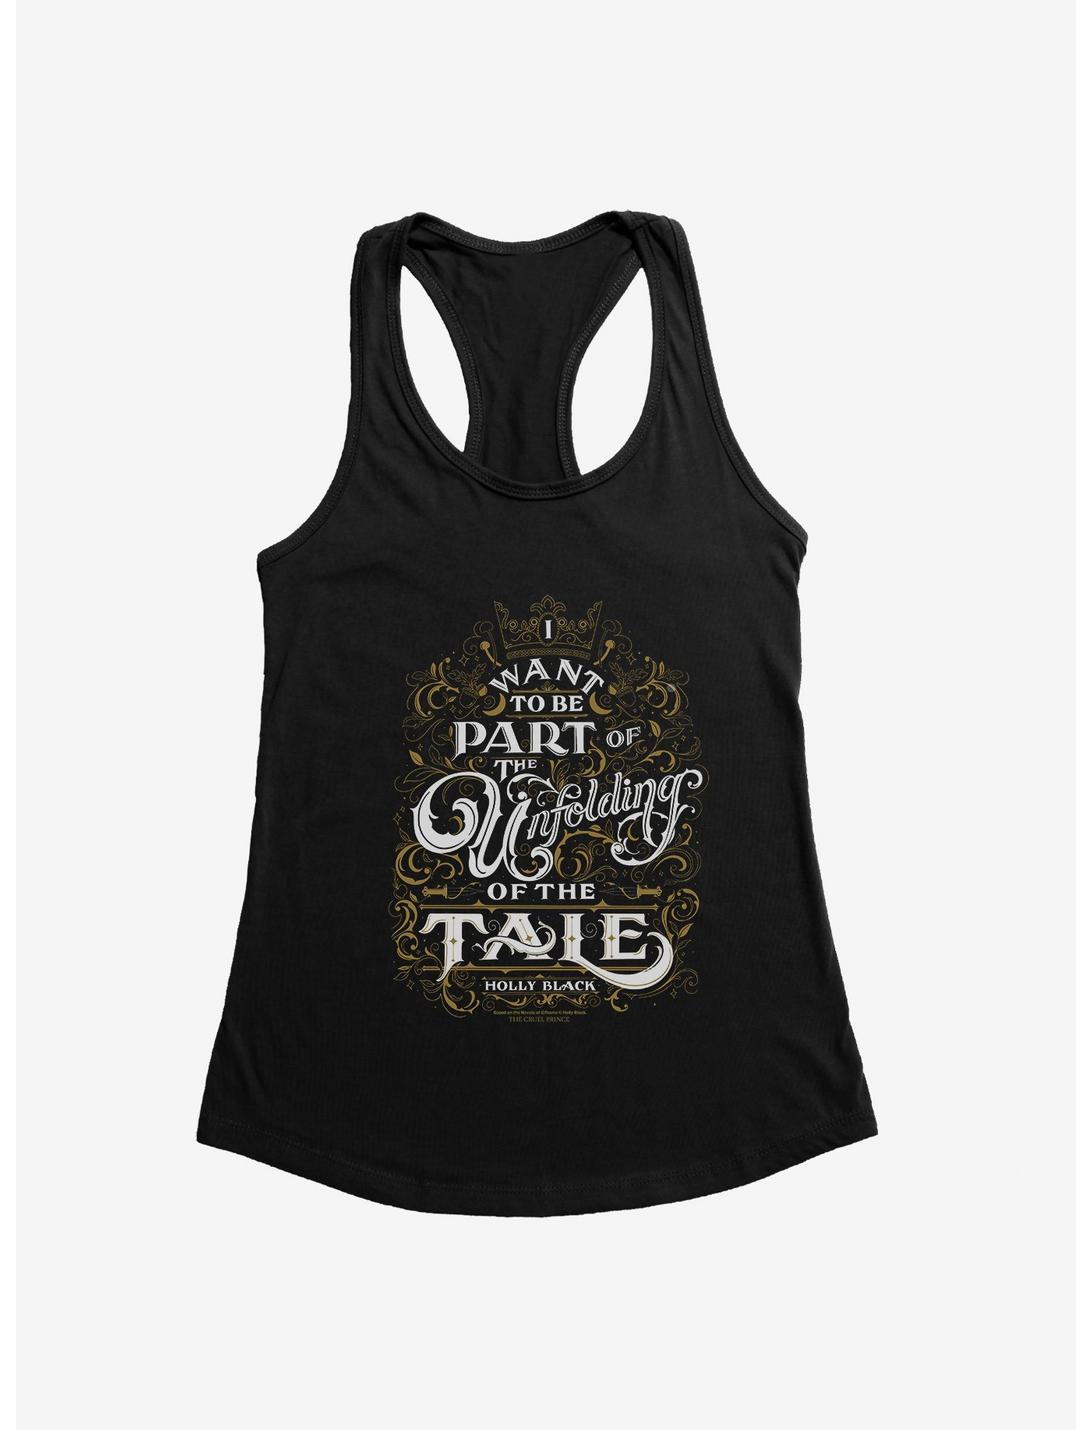 The Cruel Prince Sinister Enchantment Collection: Unfolding Of The Tale Womens Tank Top , BLACK, hi-res